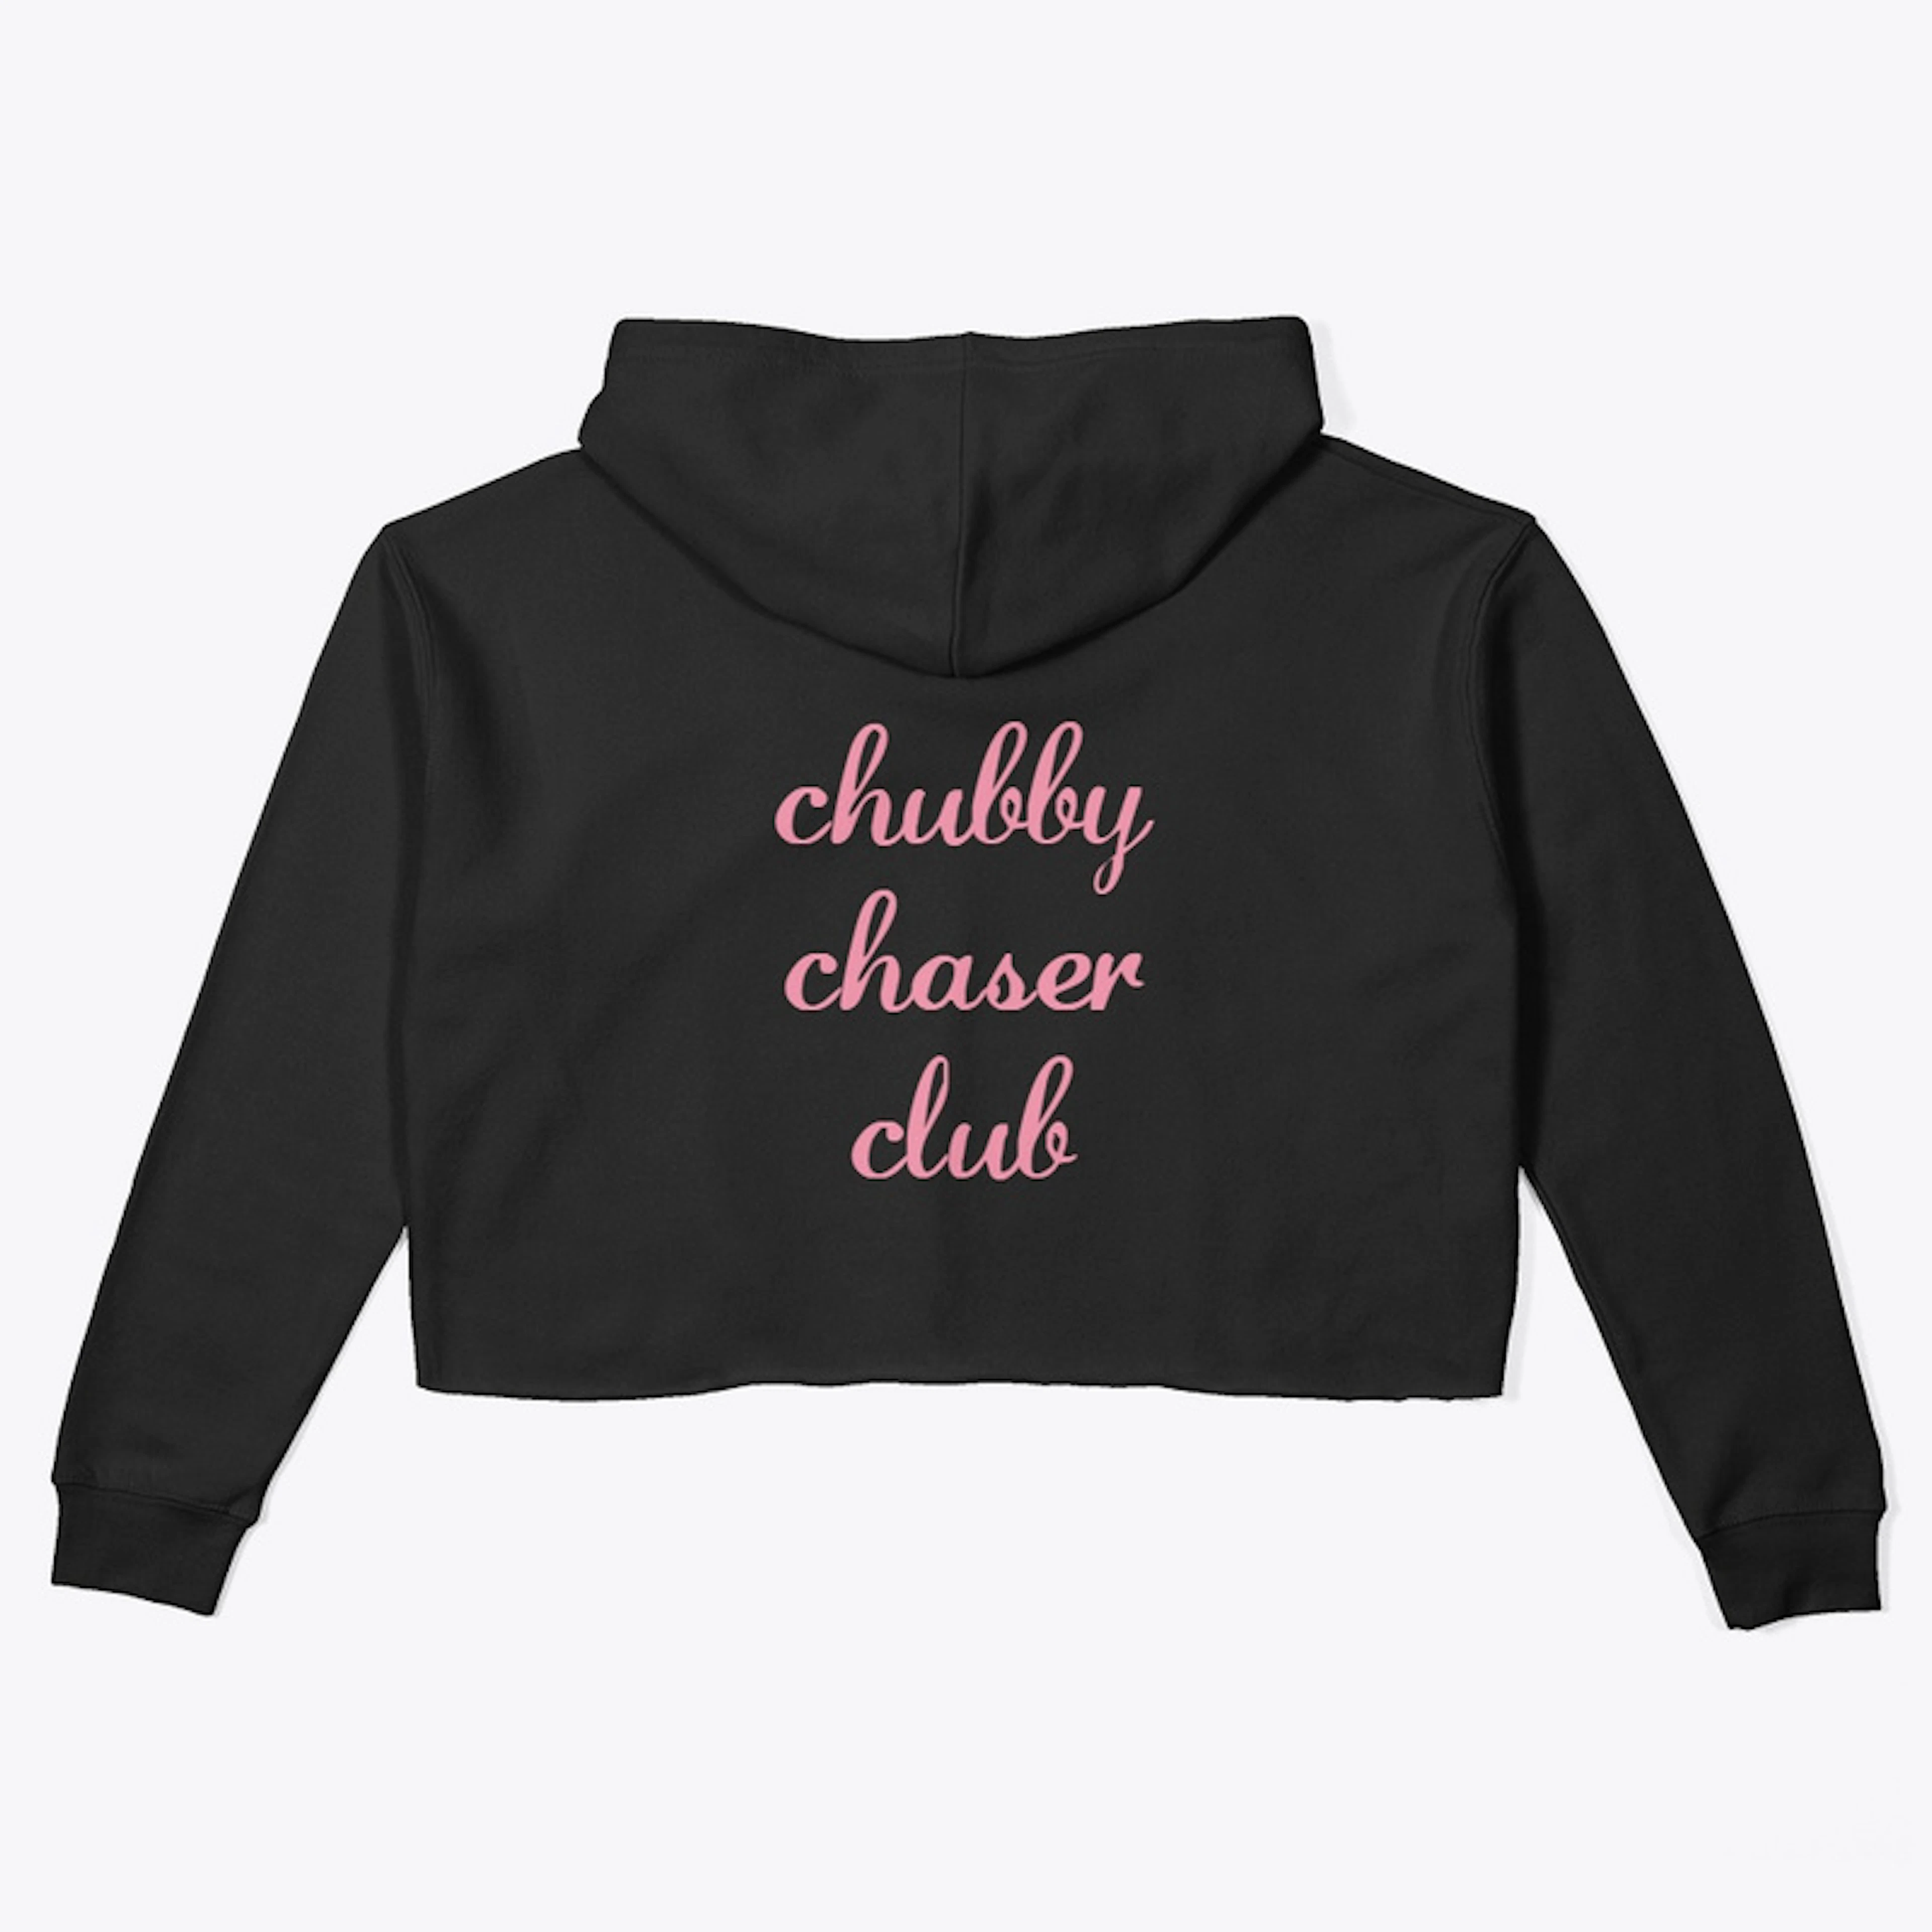 Chubby Chaser